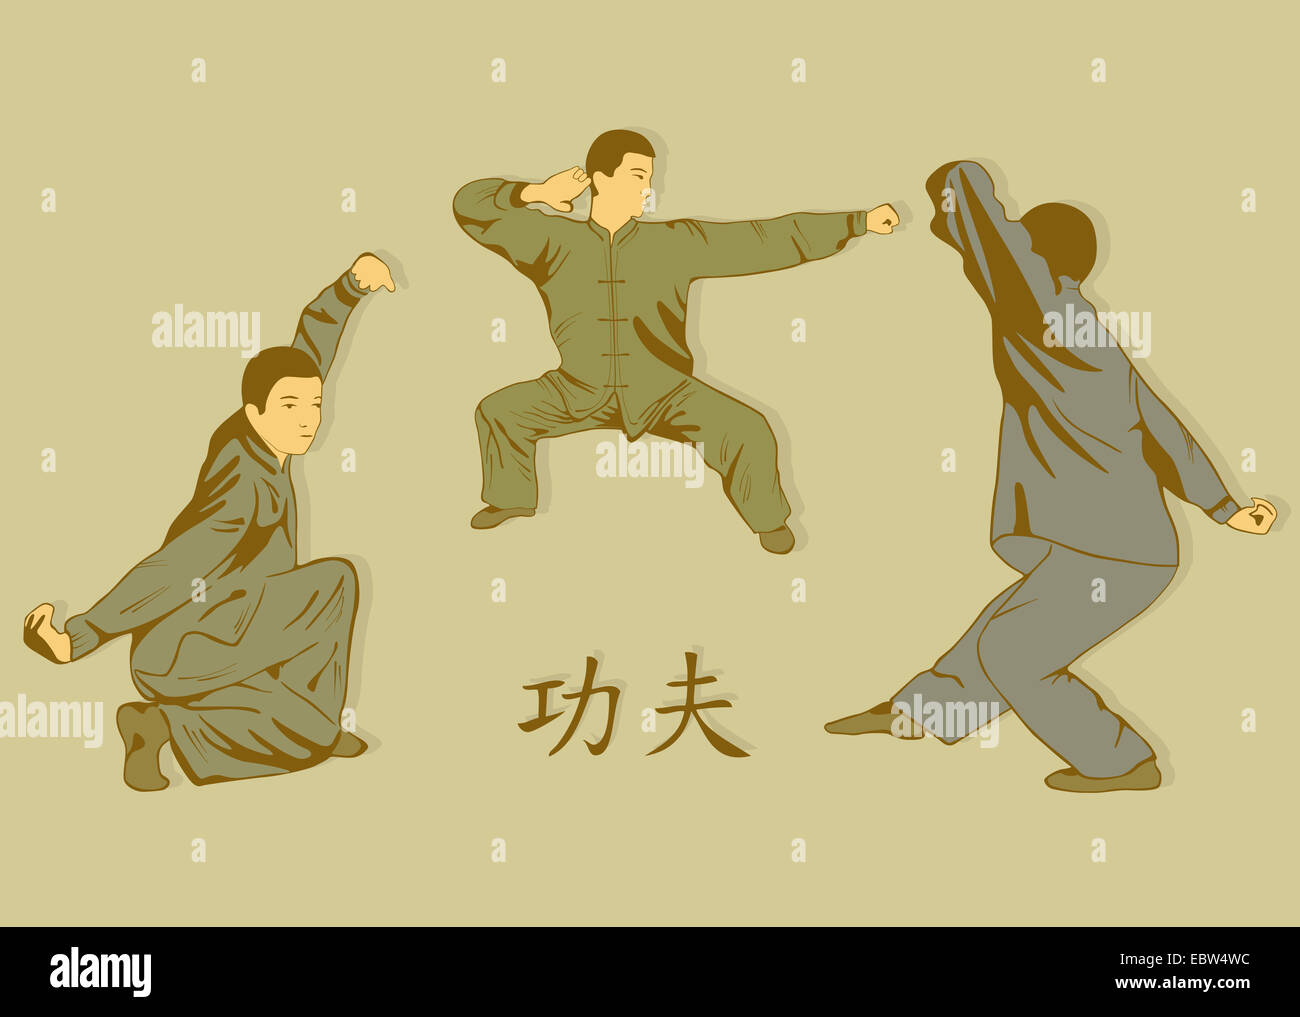 Three men represent Kung Fu, on a green background. Inscription on an illustration a hieroglyph - Kung Fu. Stock Photo